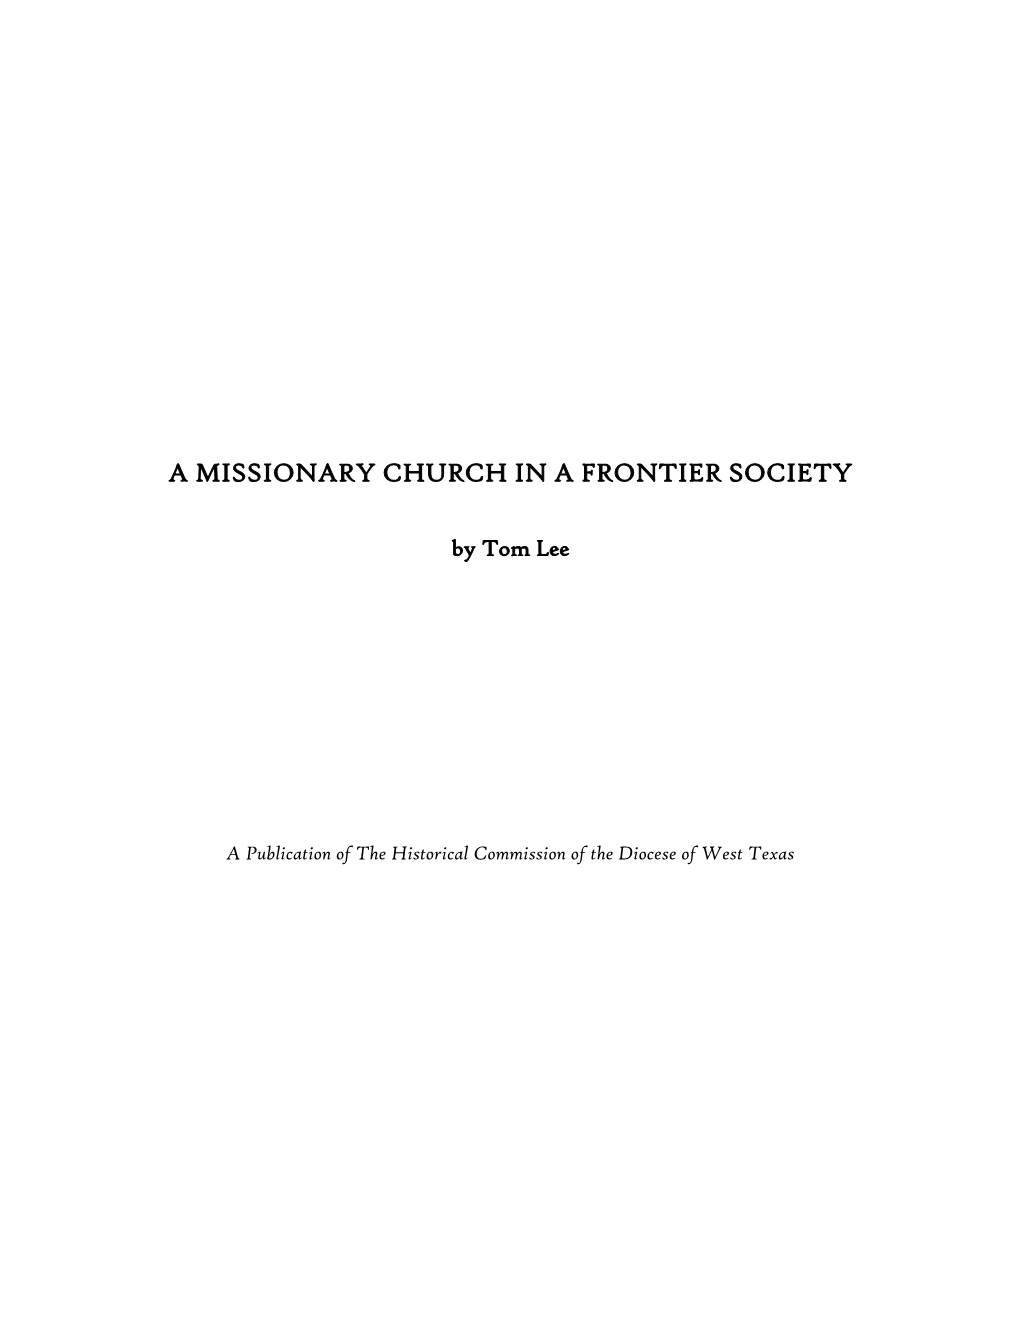 A Missionary Church in a Frontier Society